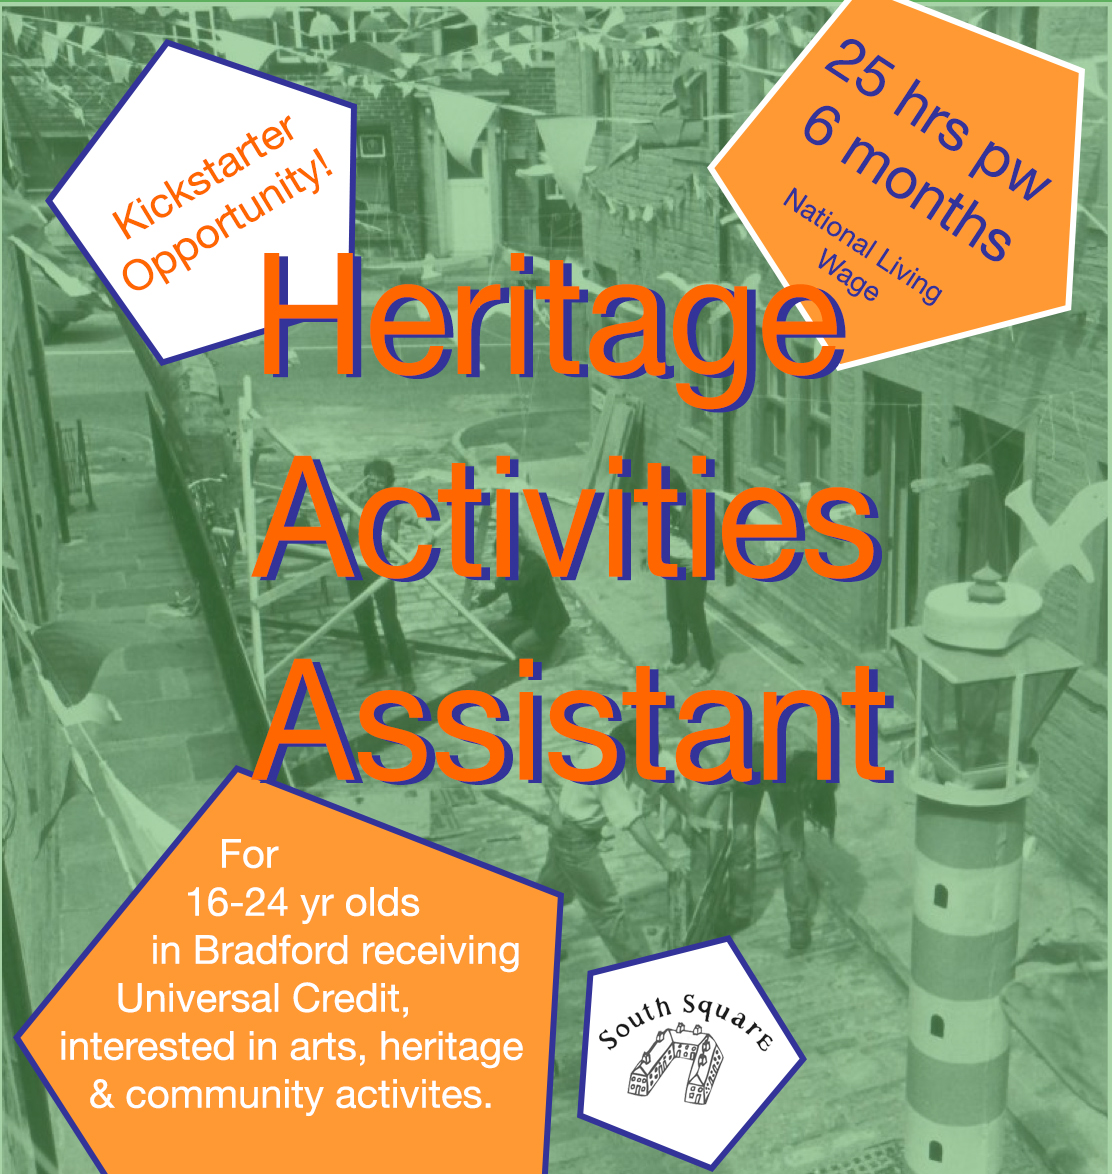 ⚠️JOB OPPORTUNITY⚠️ We're looking for a #Heritage Activities Assistant to join our team. Deadline 15 March Get in touch if you think you have the skills #Artsjobs #Kickstarter #Jobs #ArtsOpportunity southsquarecentre.co.uk/traineeship